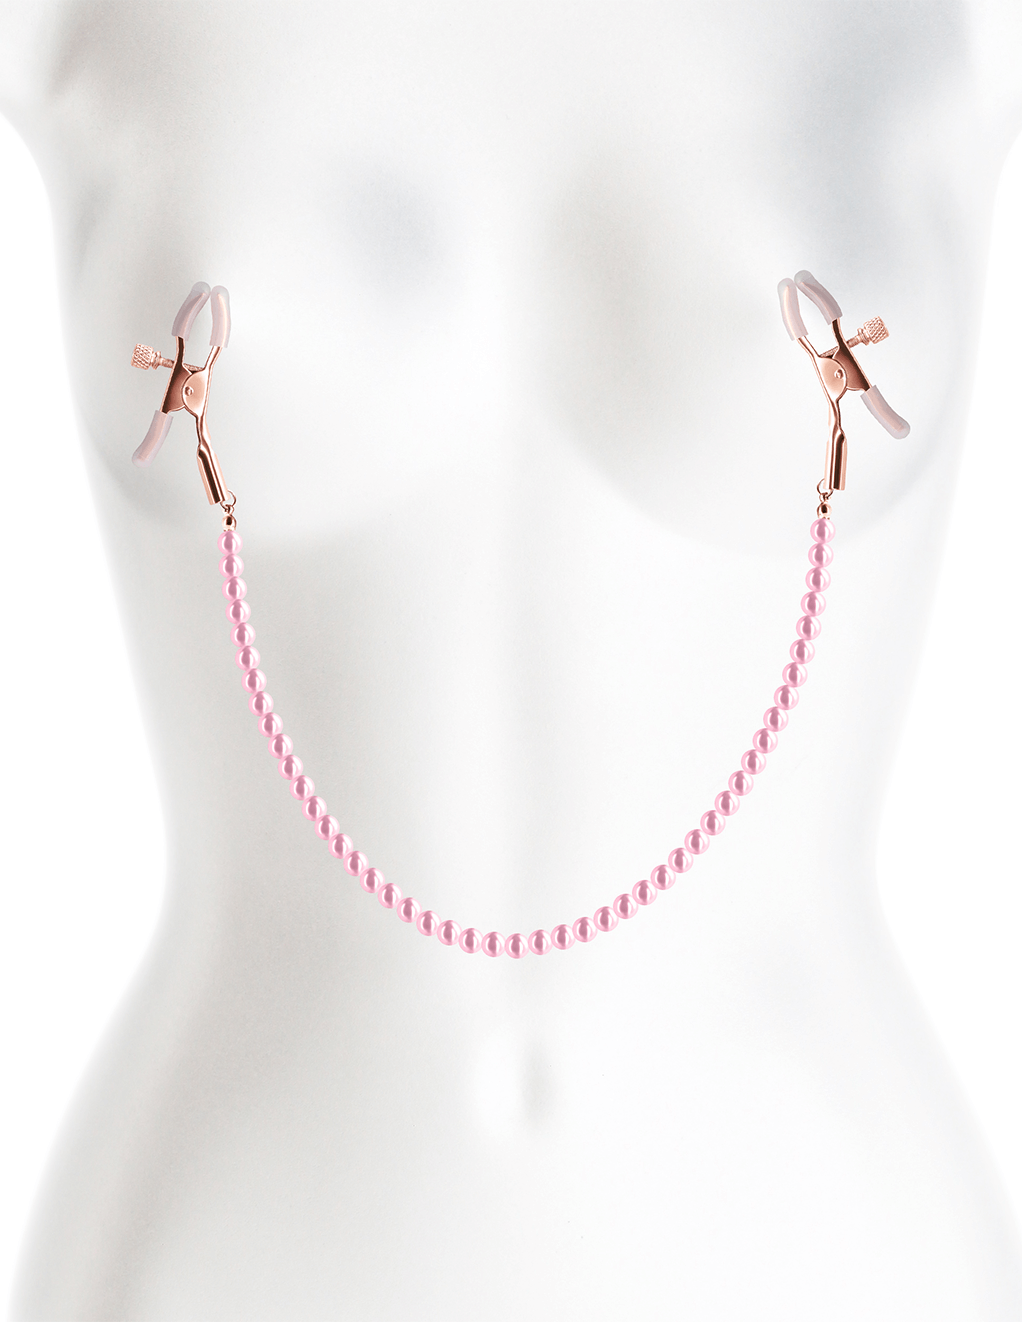 Adjustable Pearl Chain Clamps DC1 - Pink Clamps